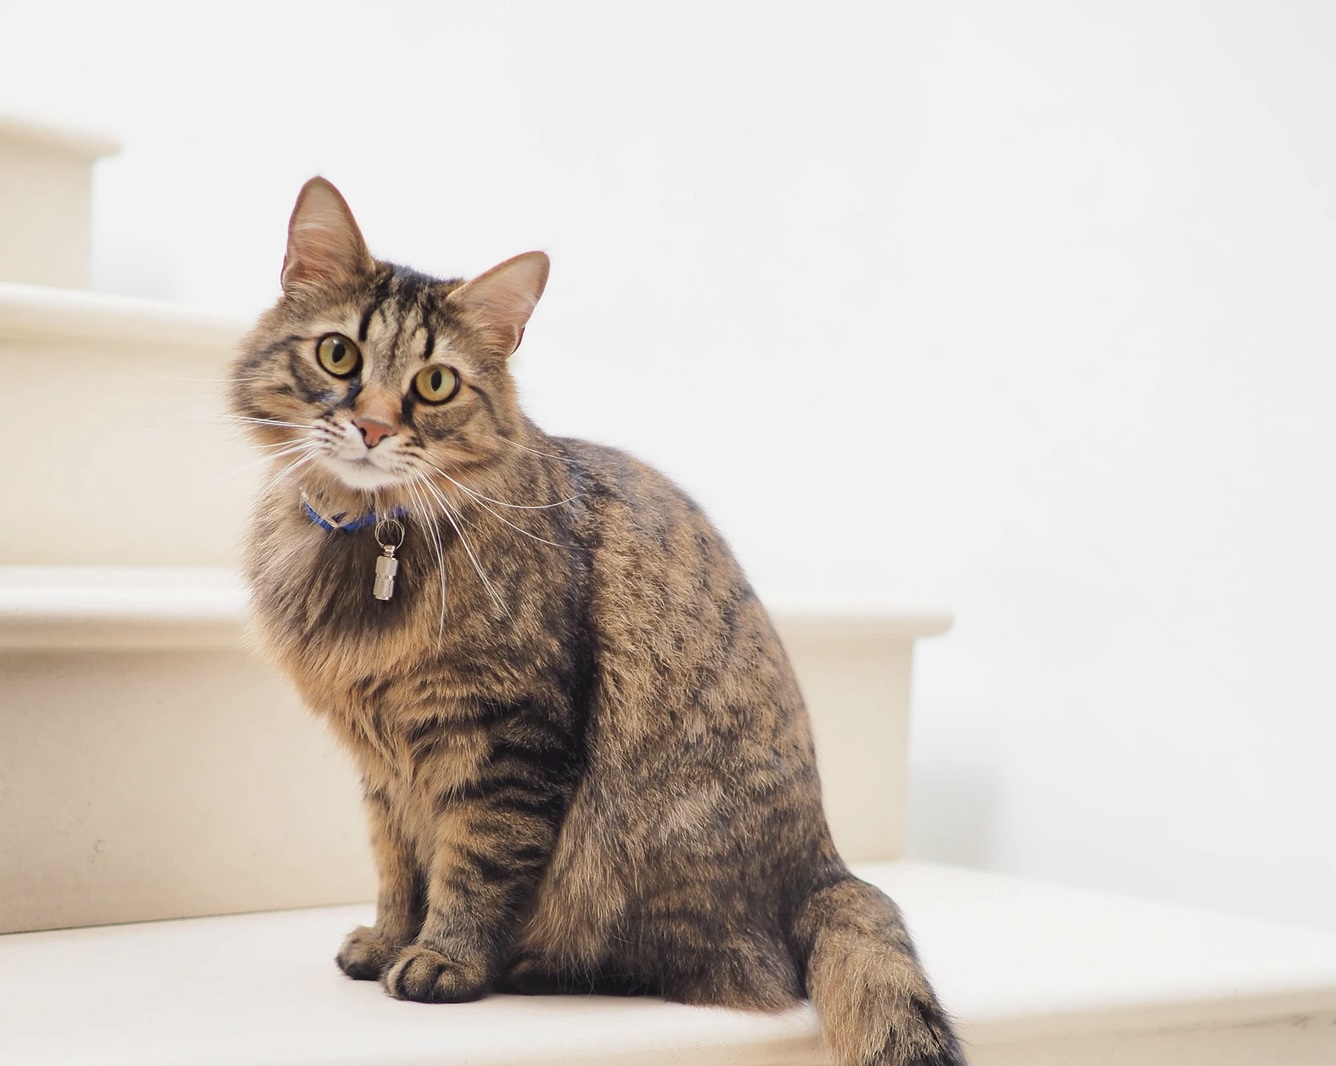 NEWS | Government to introduce compulsory cat microchipping to help reunite lost and stray pets